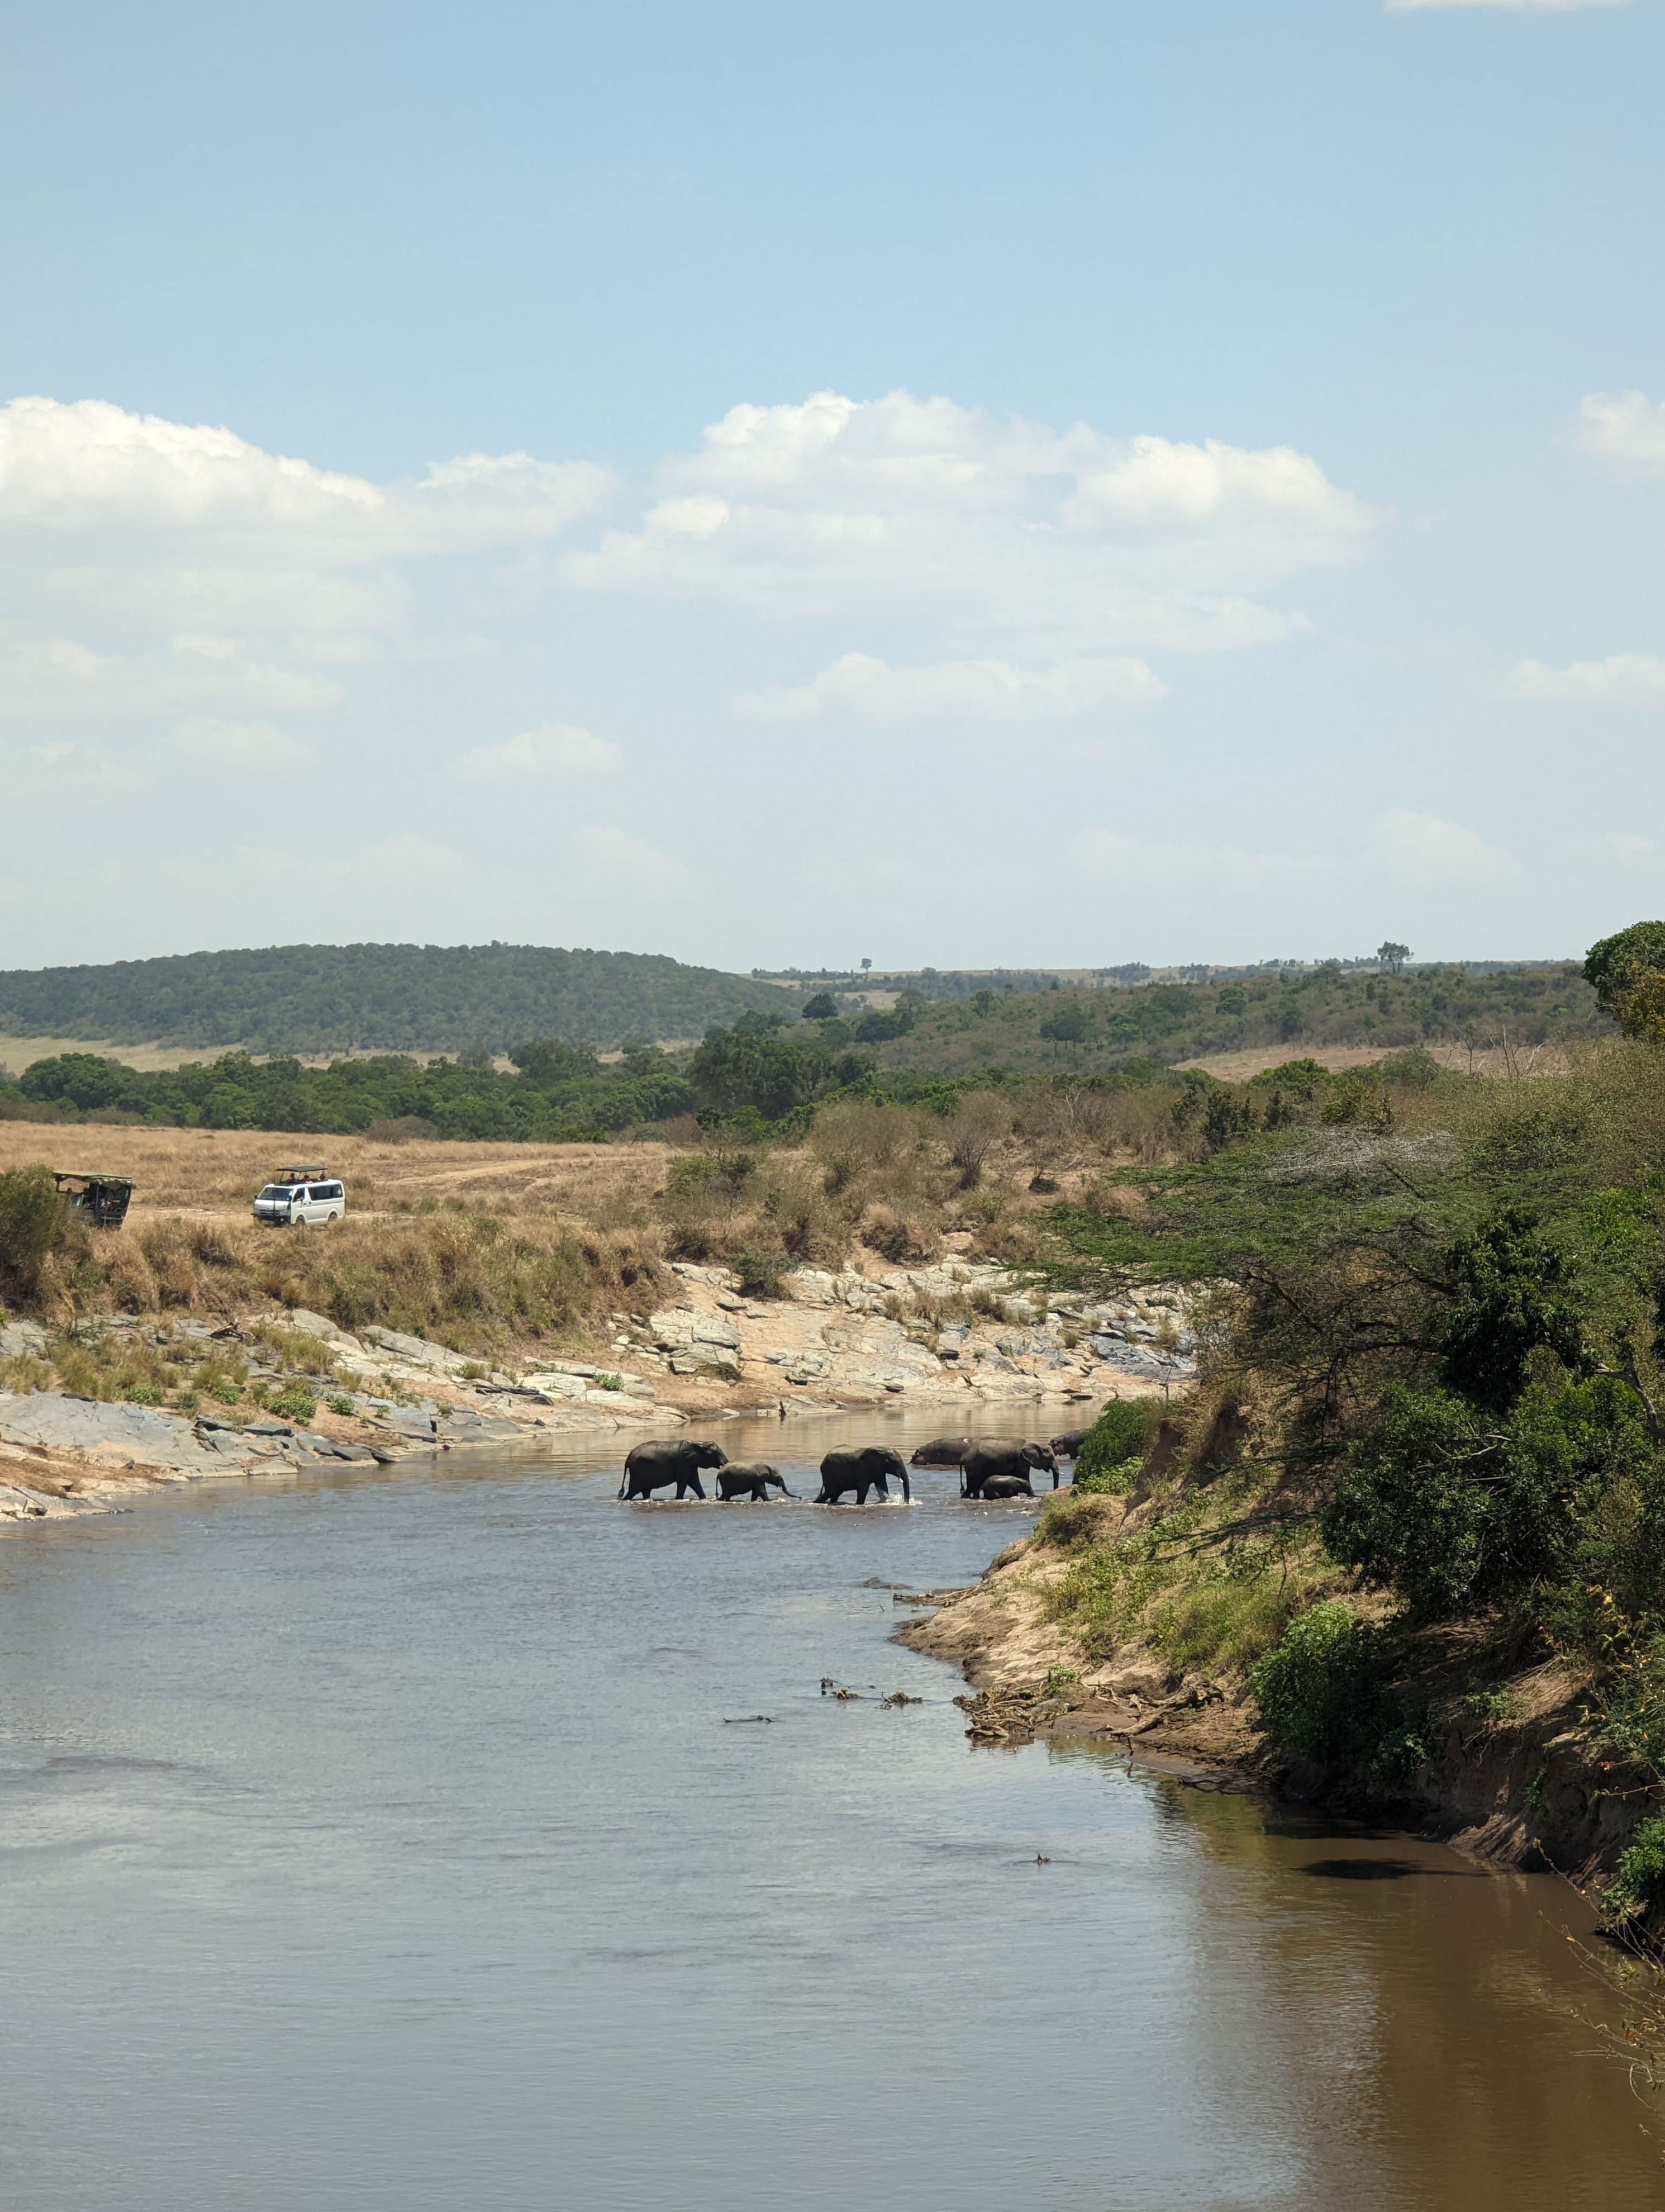 for indians on the great masai mara safari, 150% hike in fees is no worry